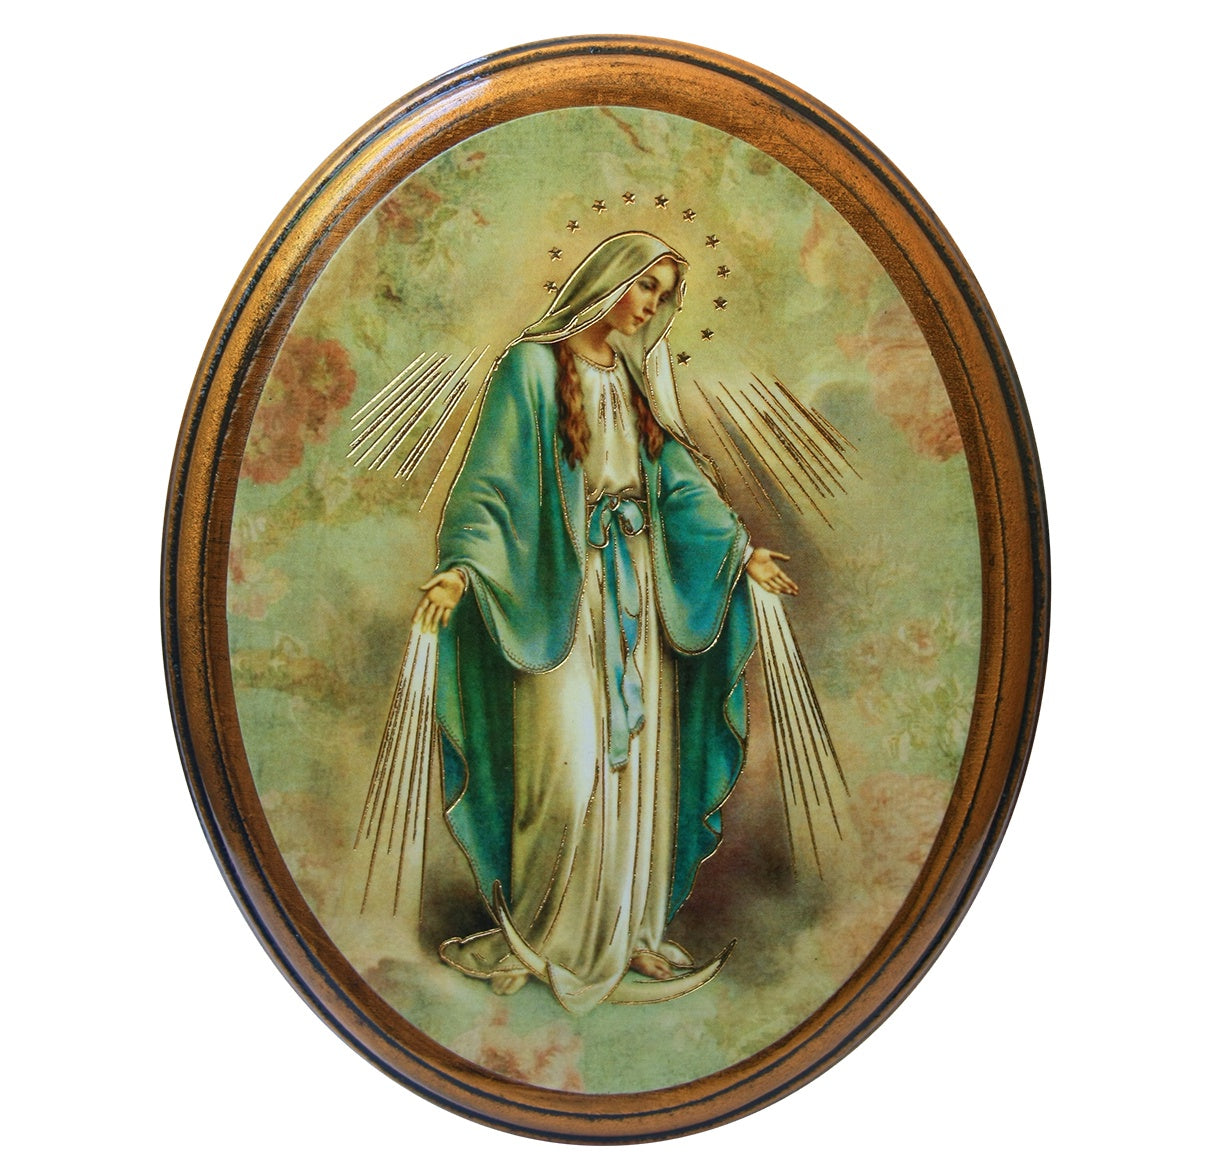 Our Lady of Grace oval wall plaque